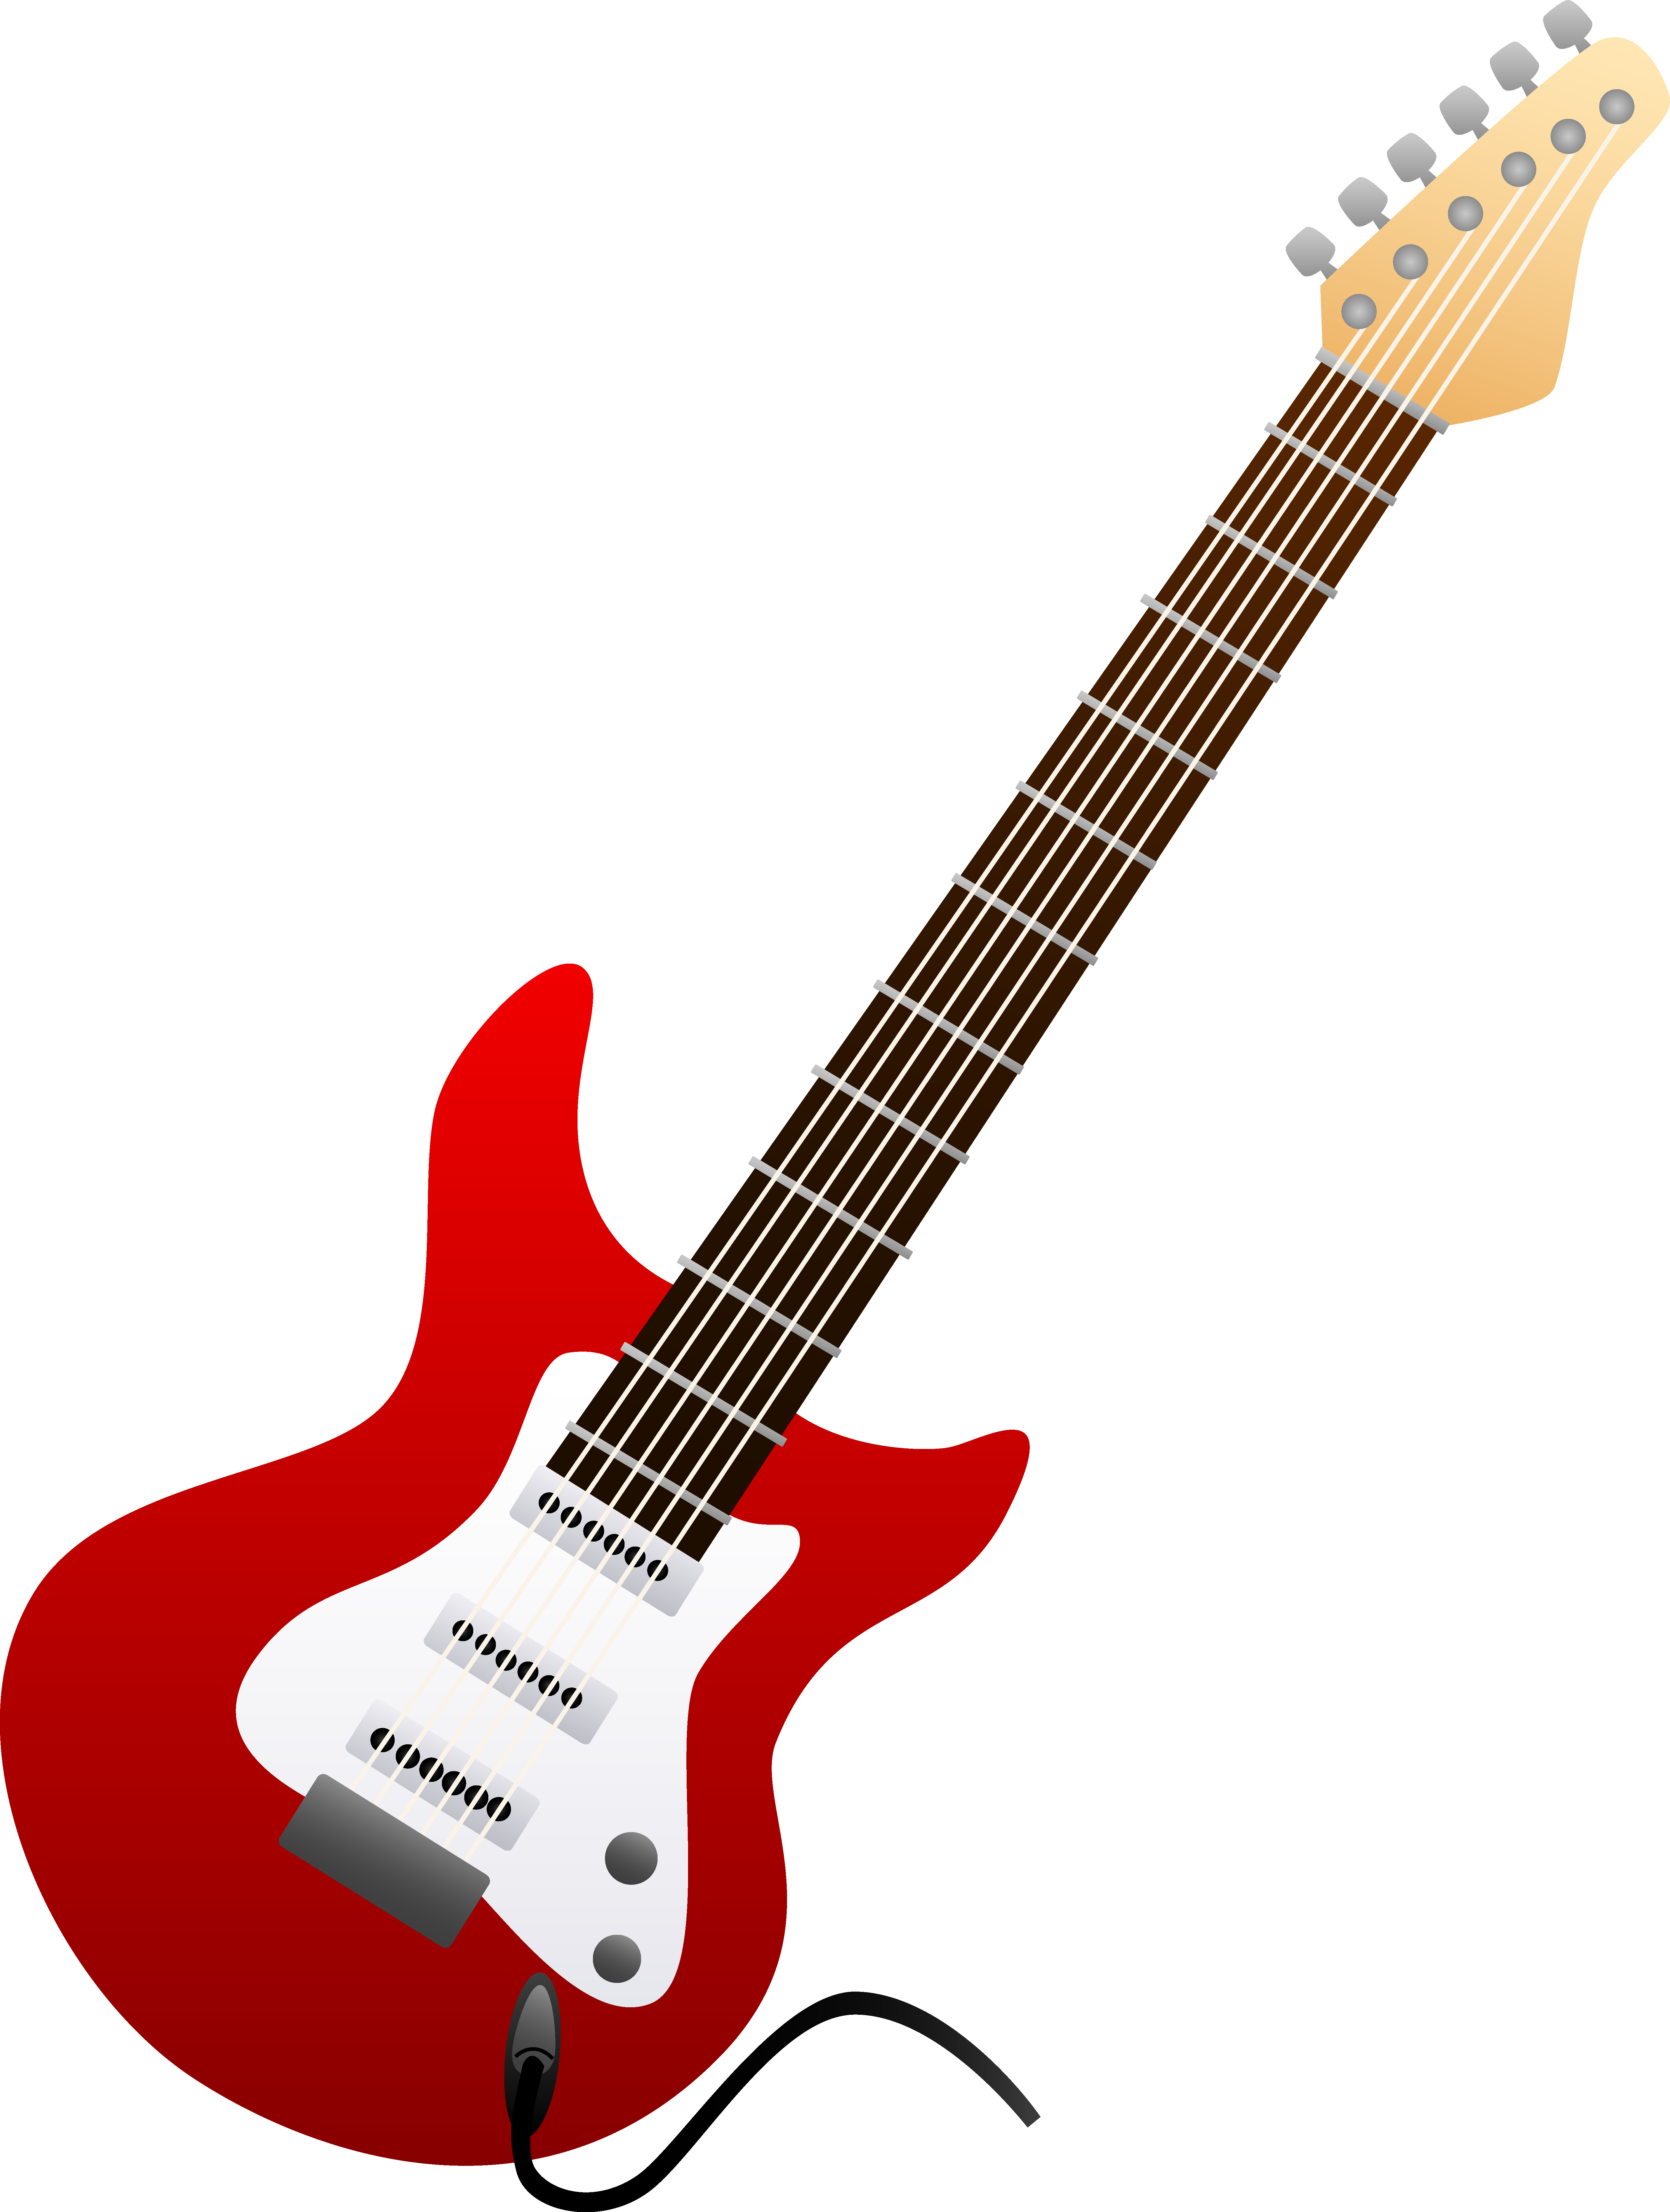 Electric Guitar Outline Clip Art | Clipart library - Free Clipart Images